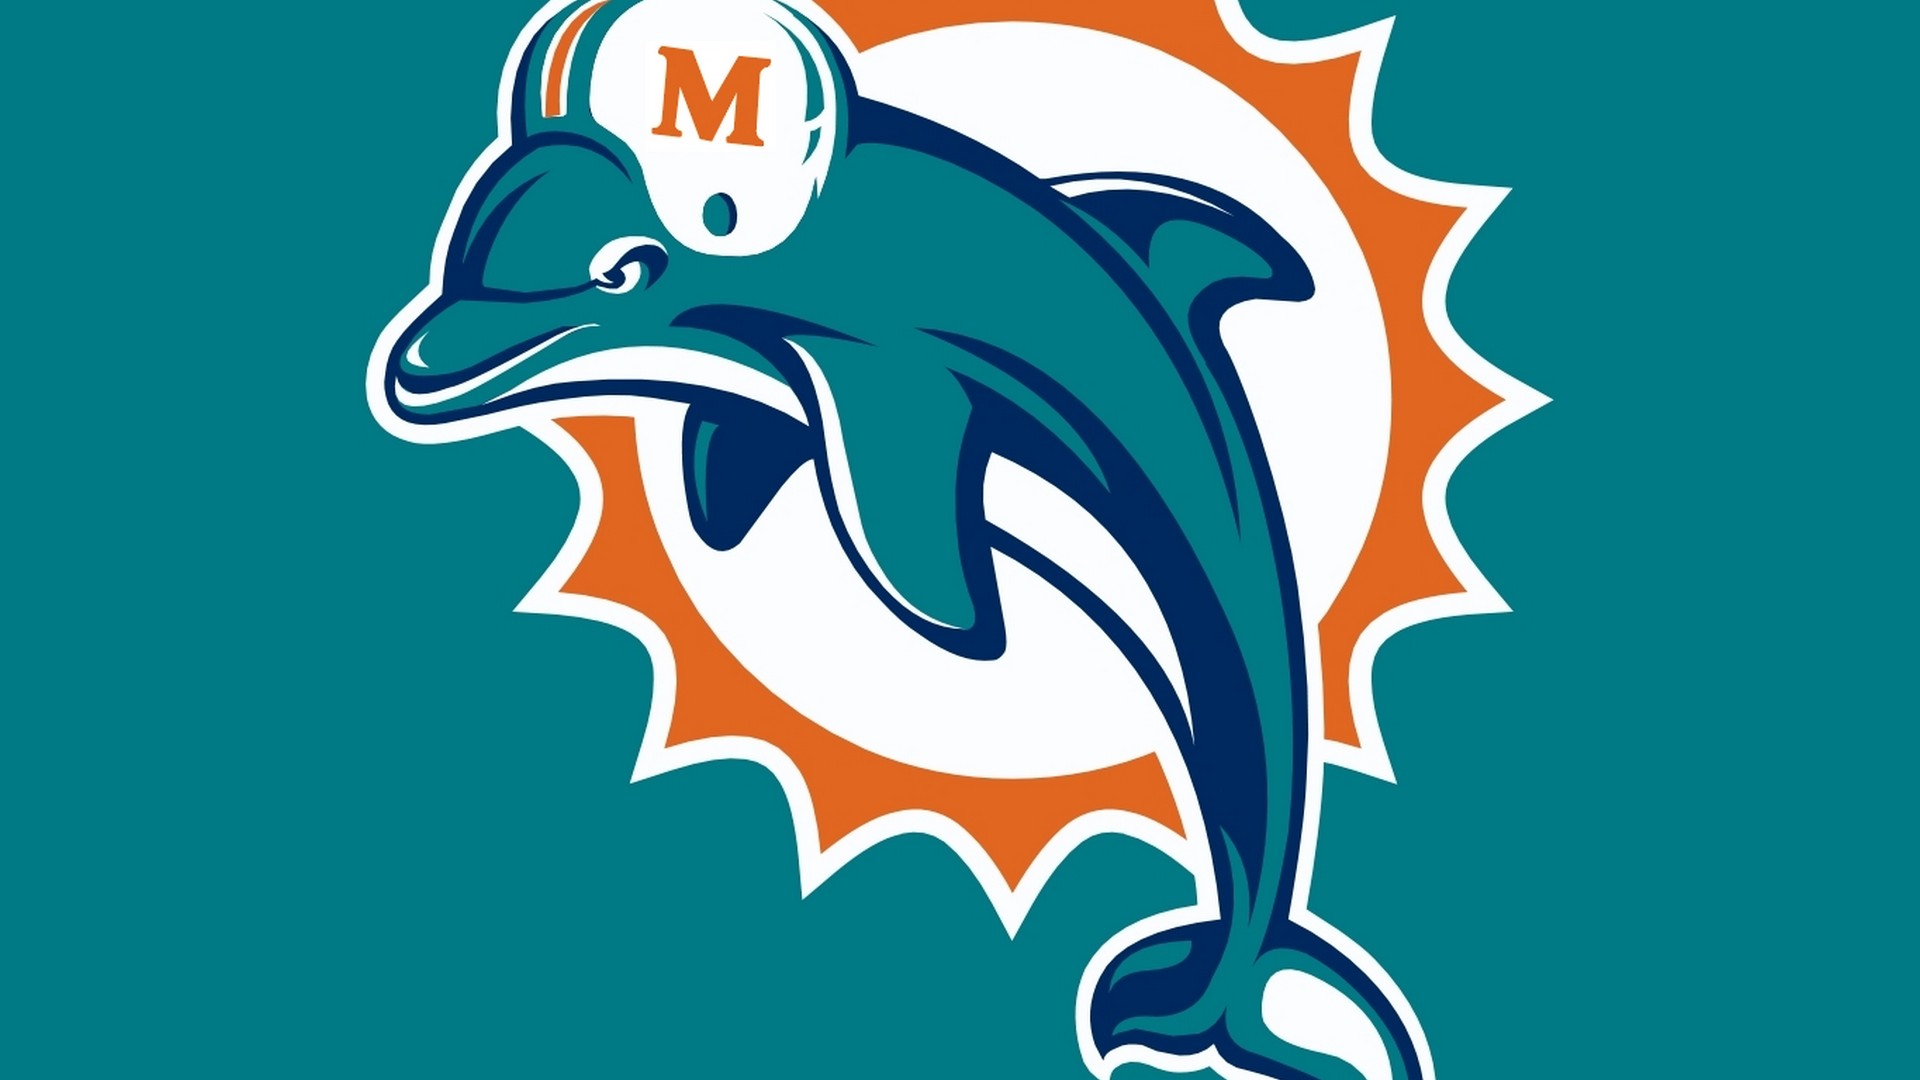 Windows Wallpaper Miami Dolphins With Resolution 1920X1080 pixel. You can make this wallpaper for your Mac or Windows Desktop Background, iPhone, Android or Tablet and another Smartphone device for free